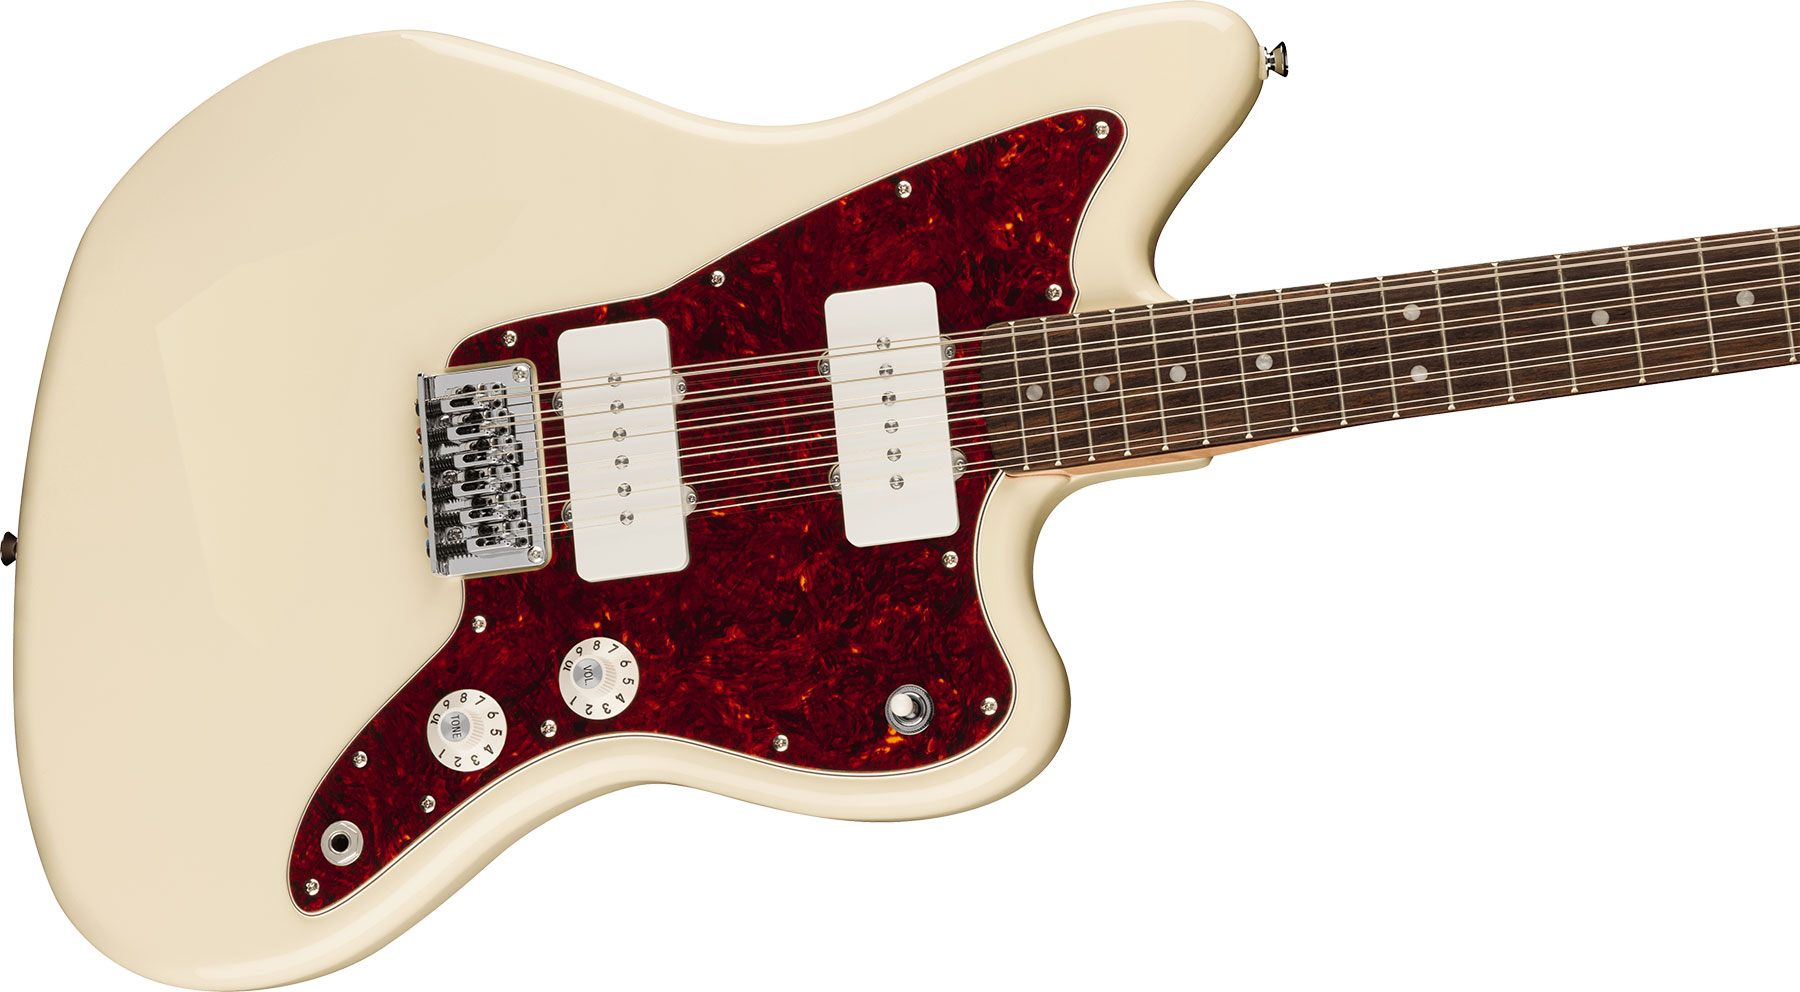 Squier Jazzmaster Xii Paranormal 2s Ht Lau - Olympic White - 12 string electric guitar - Variation 2